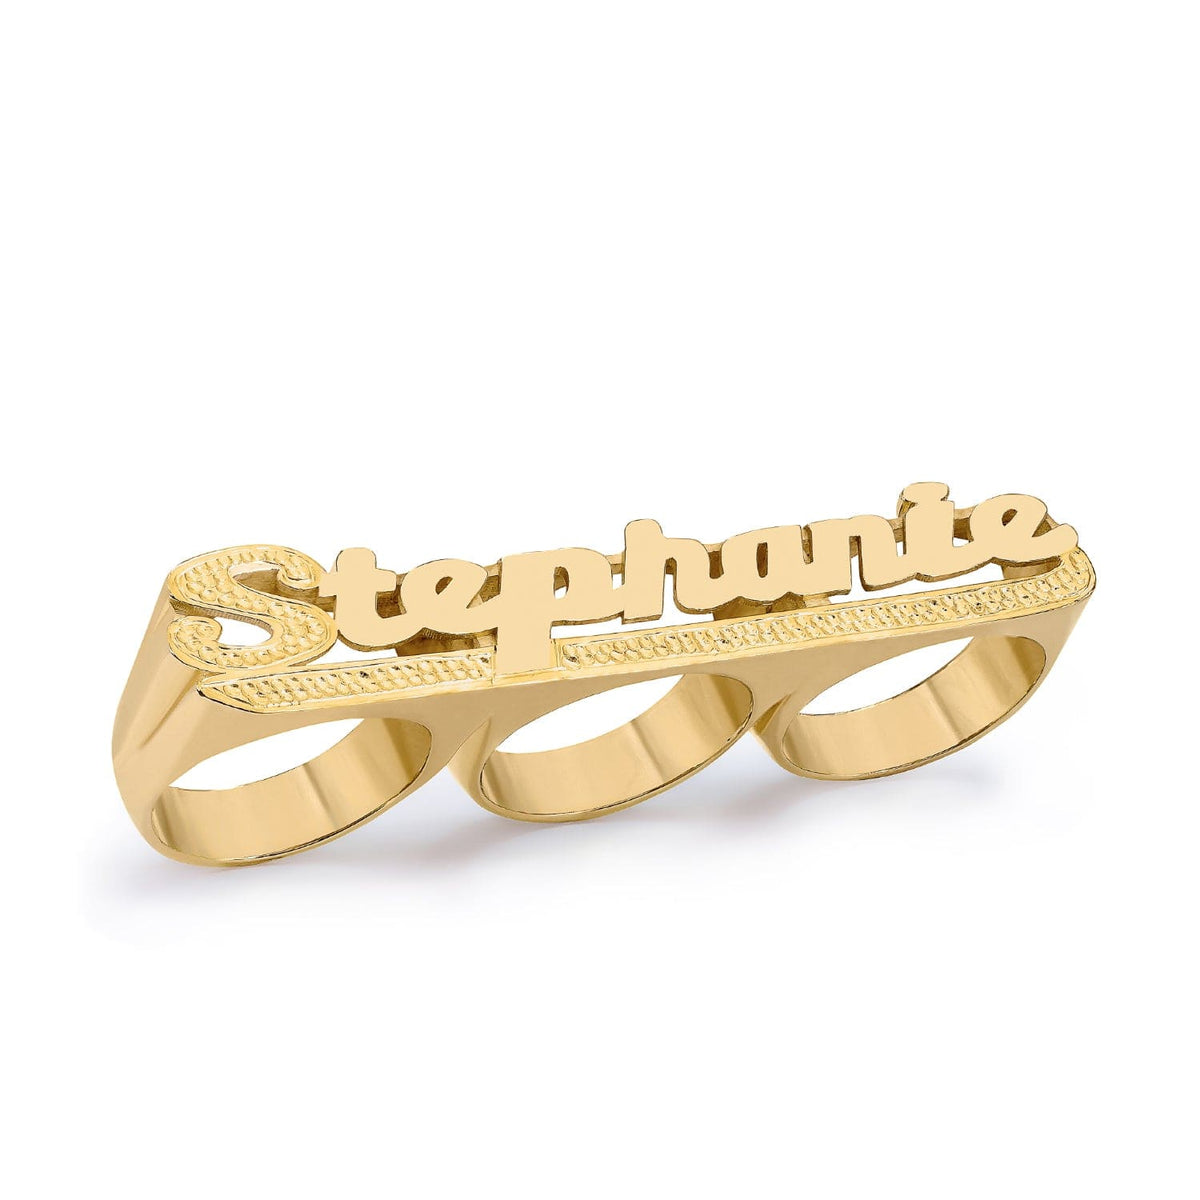 Name Ring - Two Finger - Carbo Jewelers